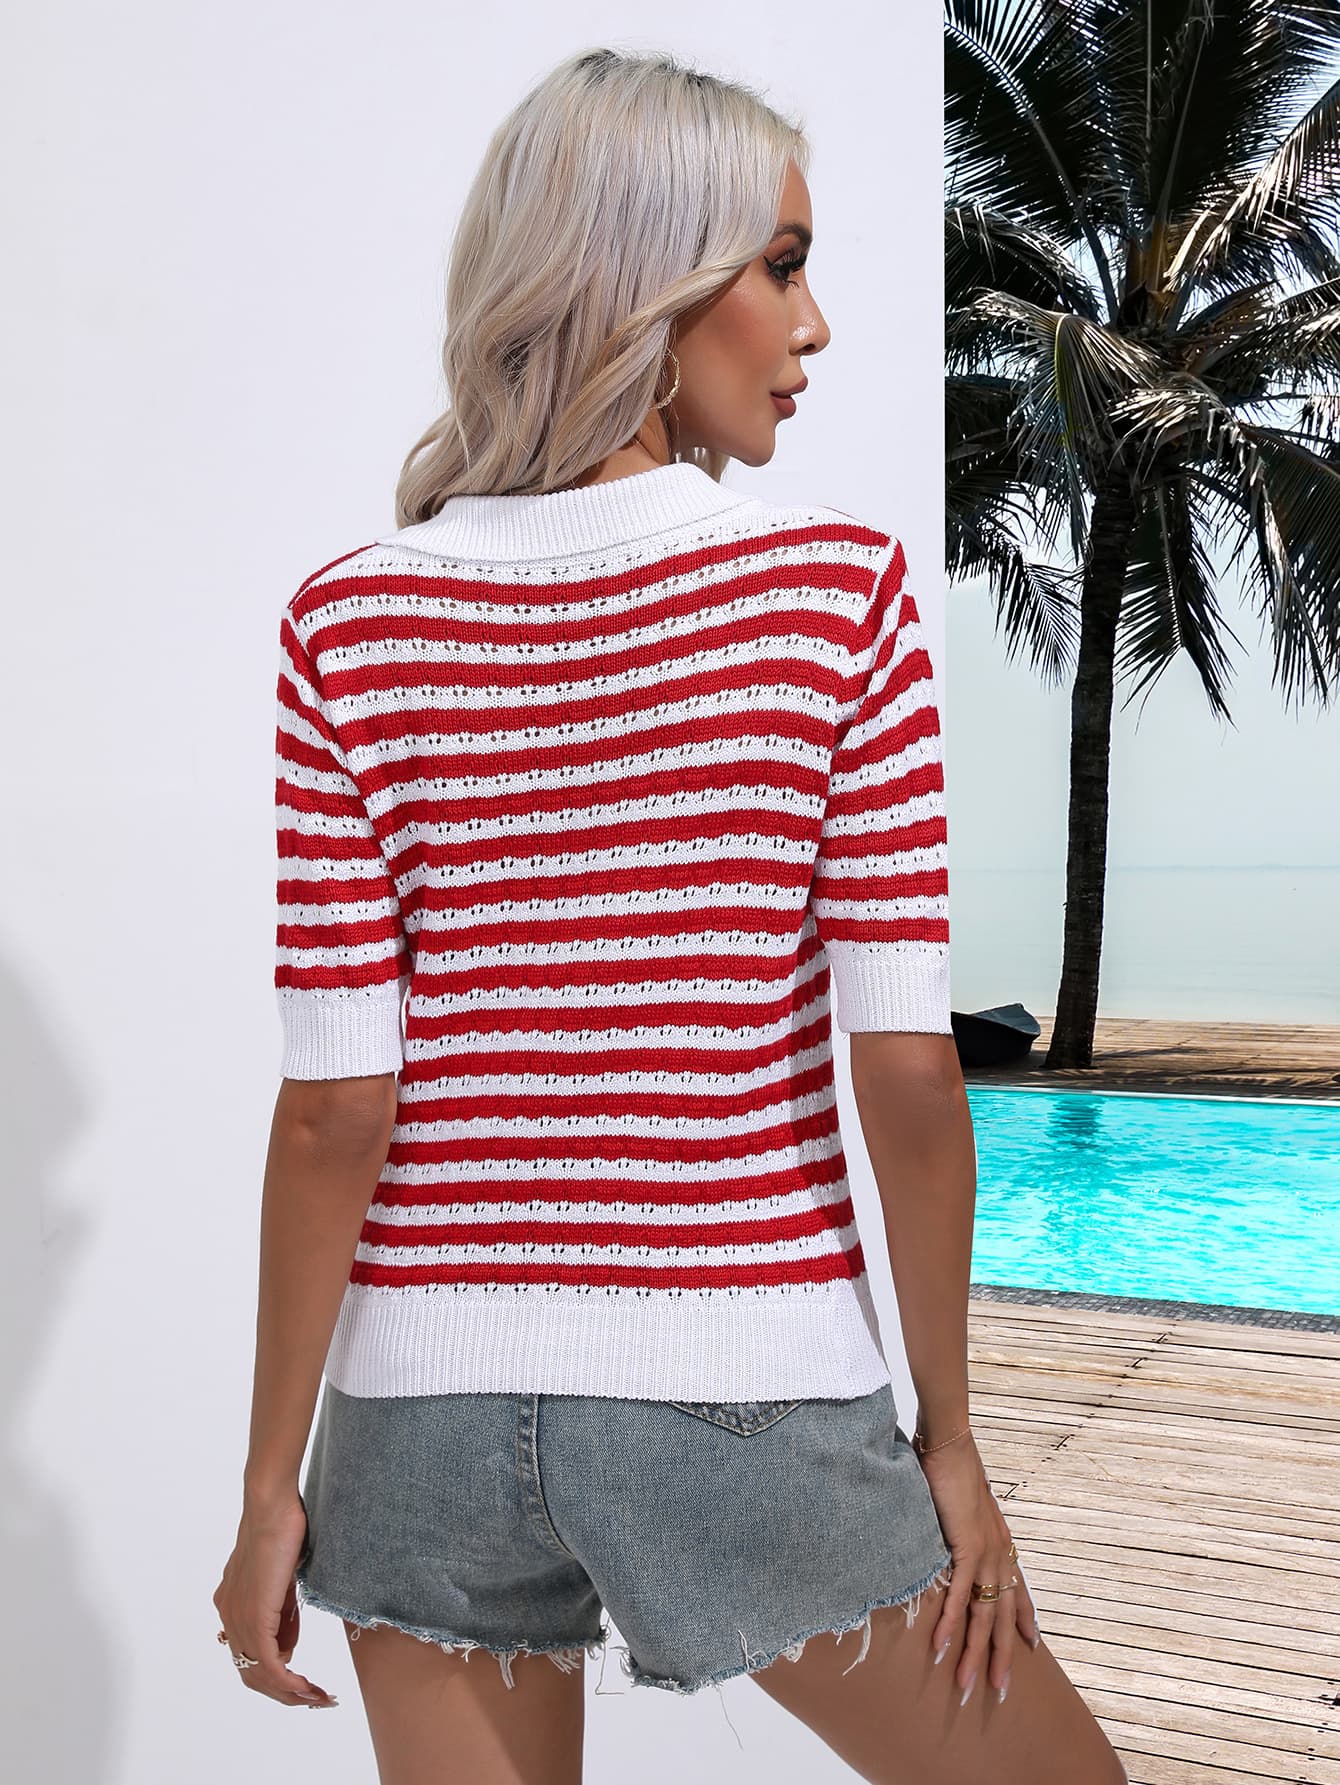 a woman standing next to a pool wearing a red and white striped sweater